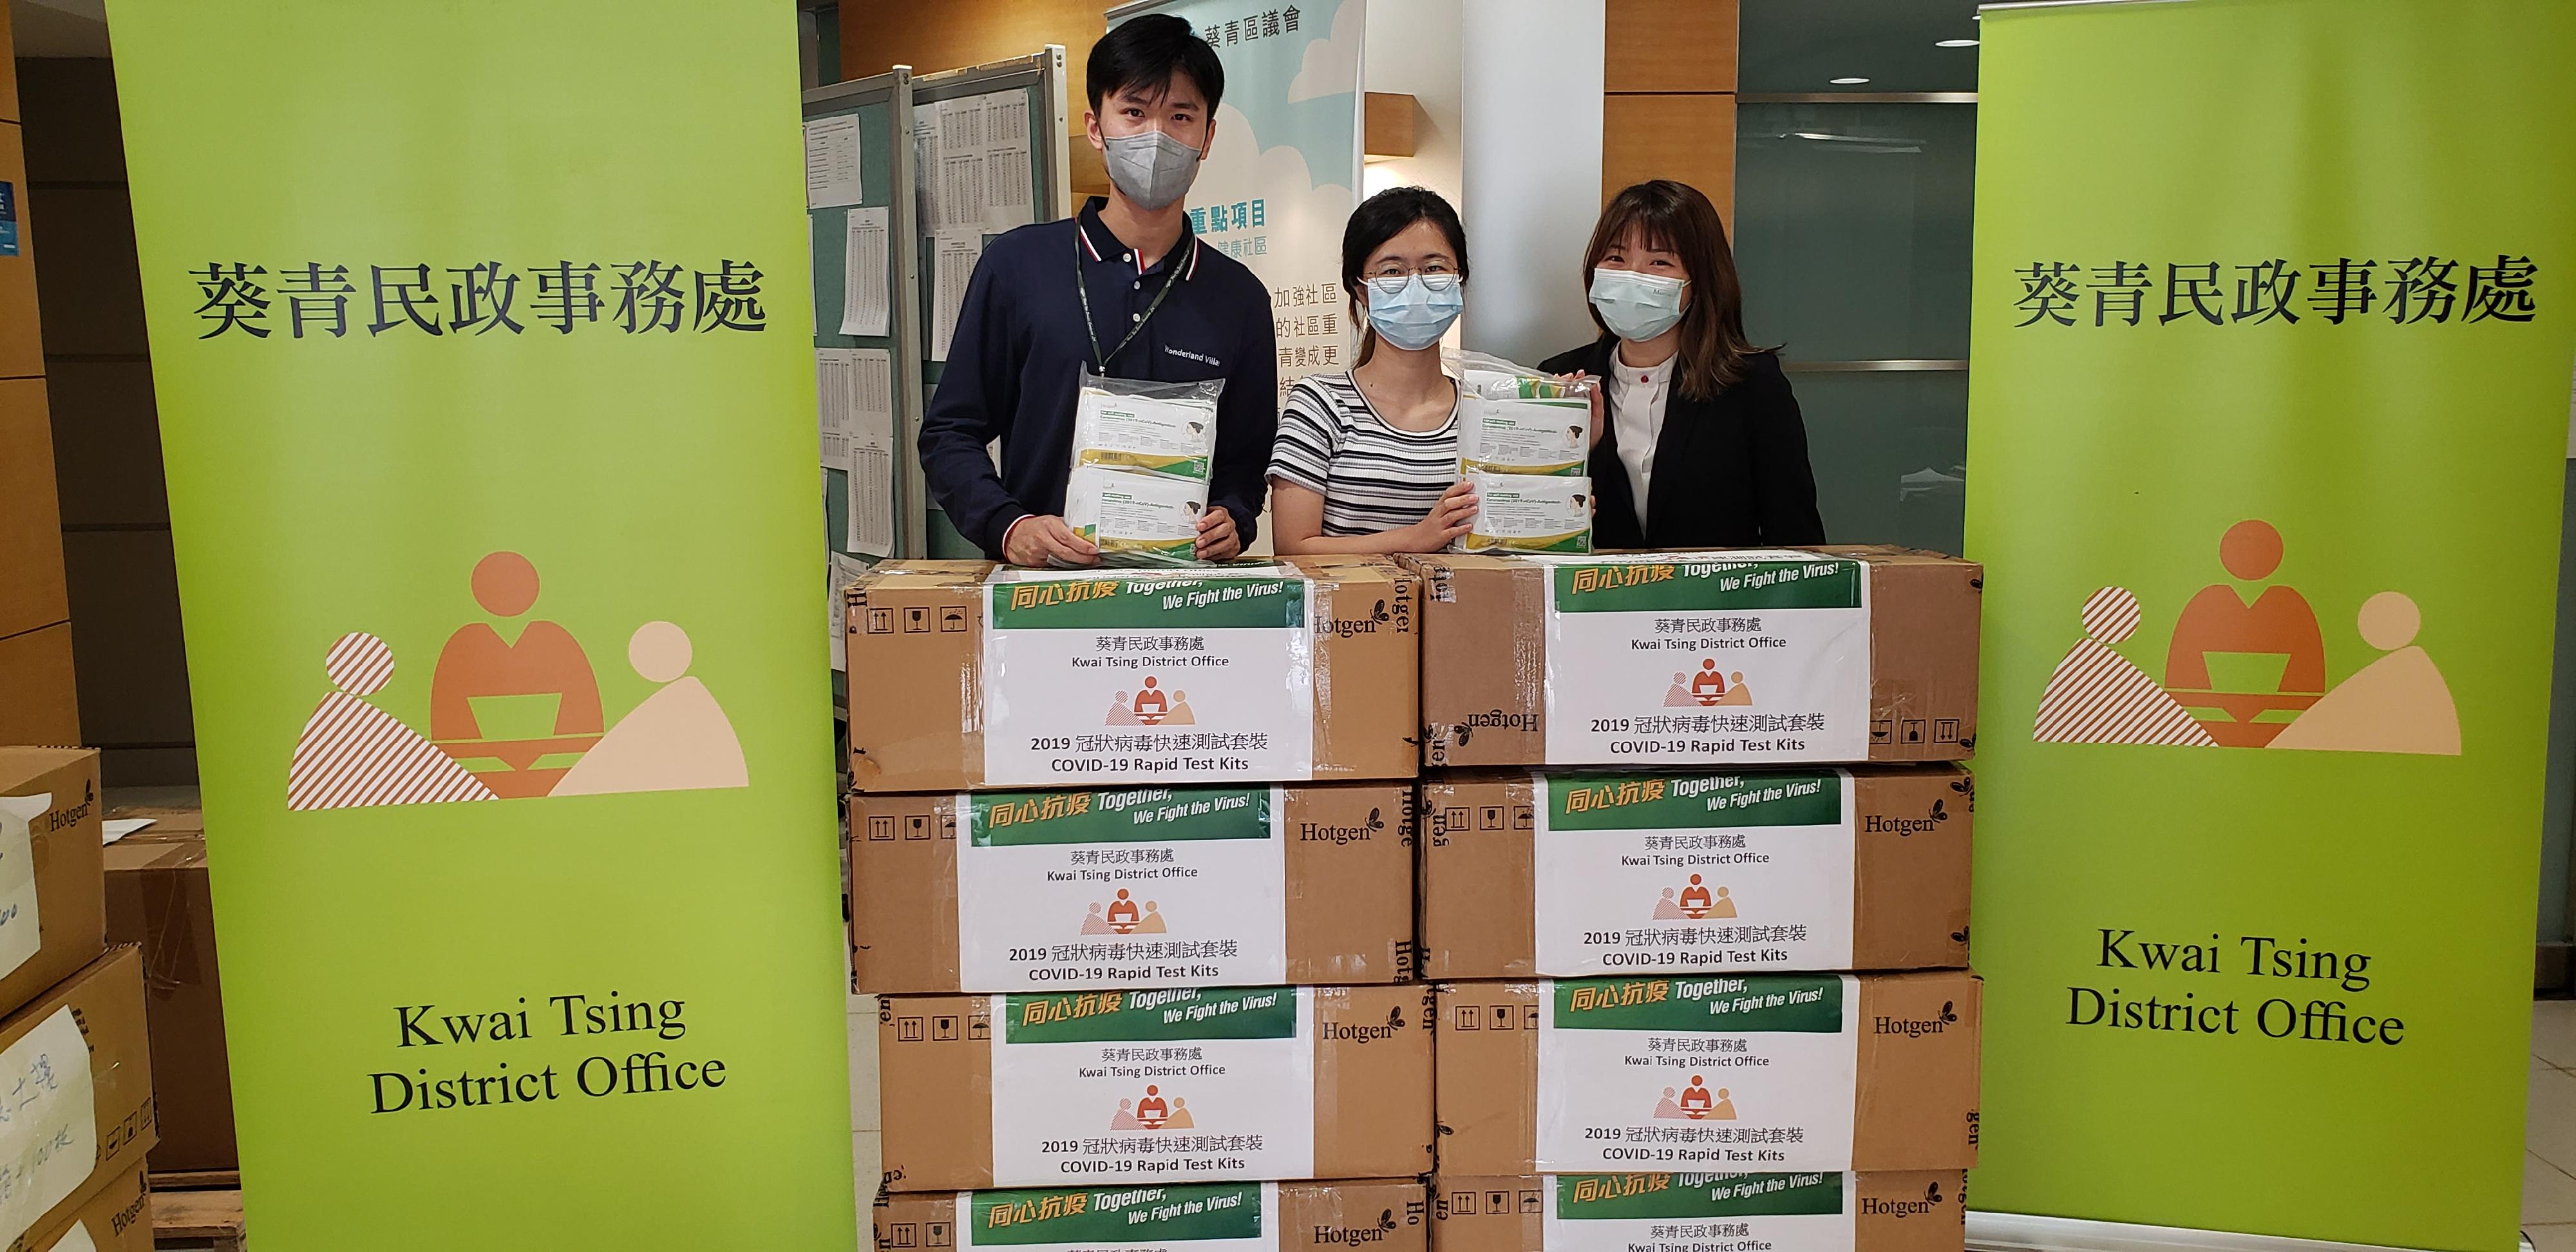 The Kwai Tsing District Office today (May 10) distributed COVID-19 rapid test kits to households, cleansing workers and property management staff living and working in Wonderland Villas for voluntary testing through the property management company and the owners' corporation.